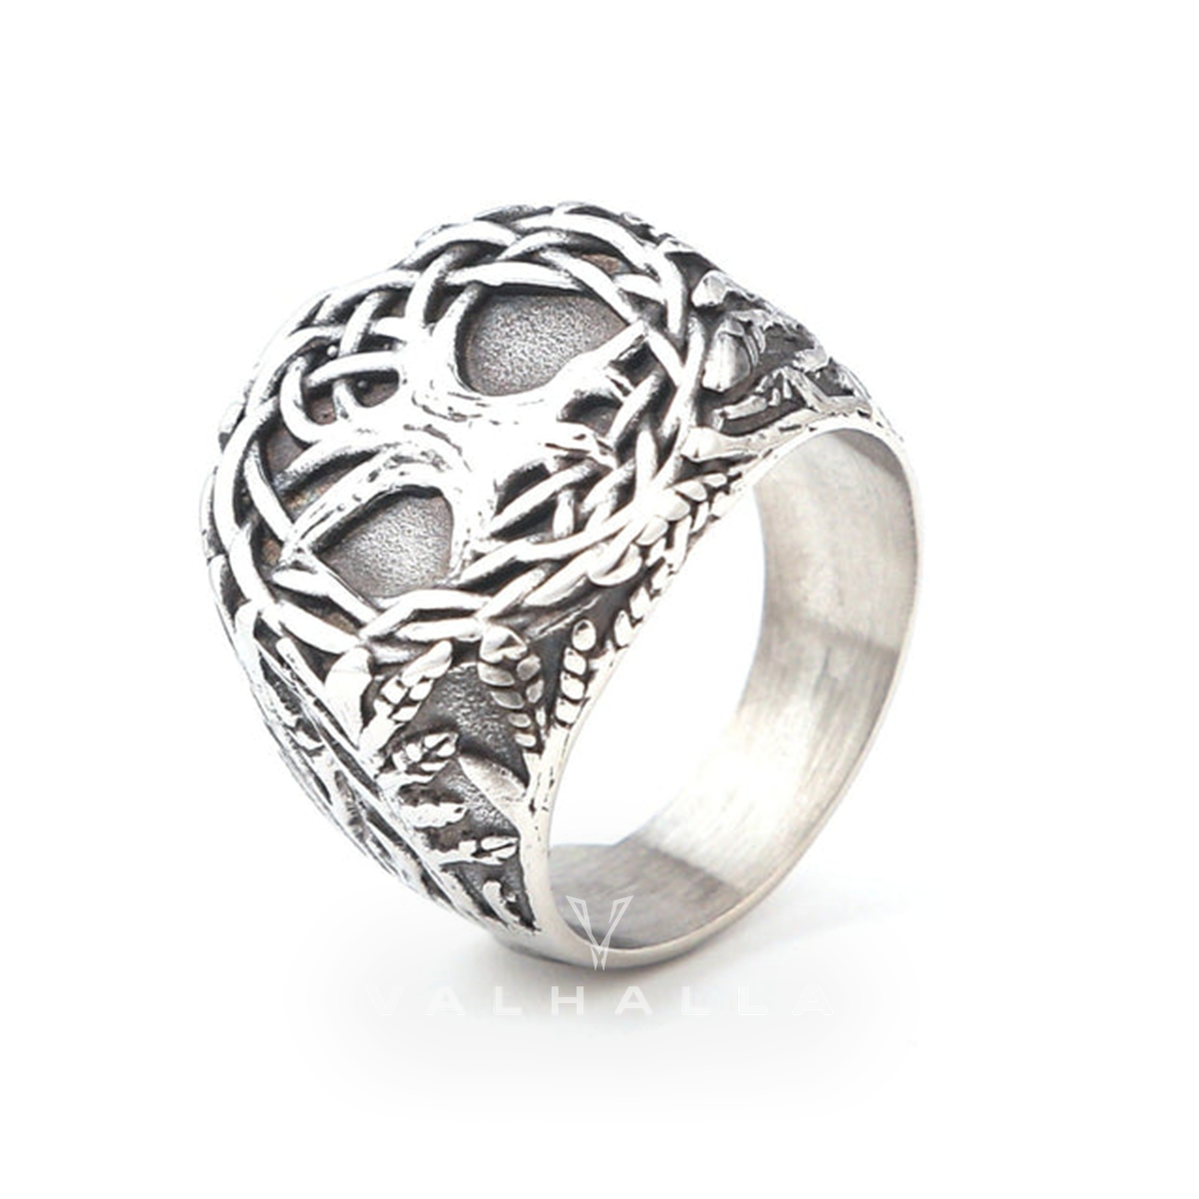 Handcrafted Stainless Steel Yggdrasil / Tree of Life Signet Ring